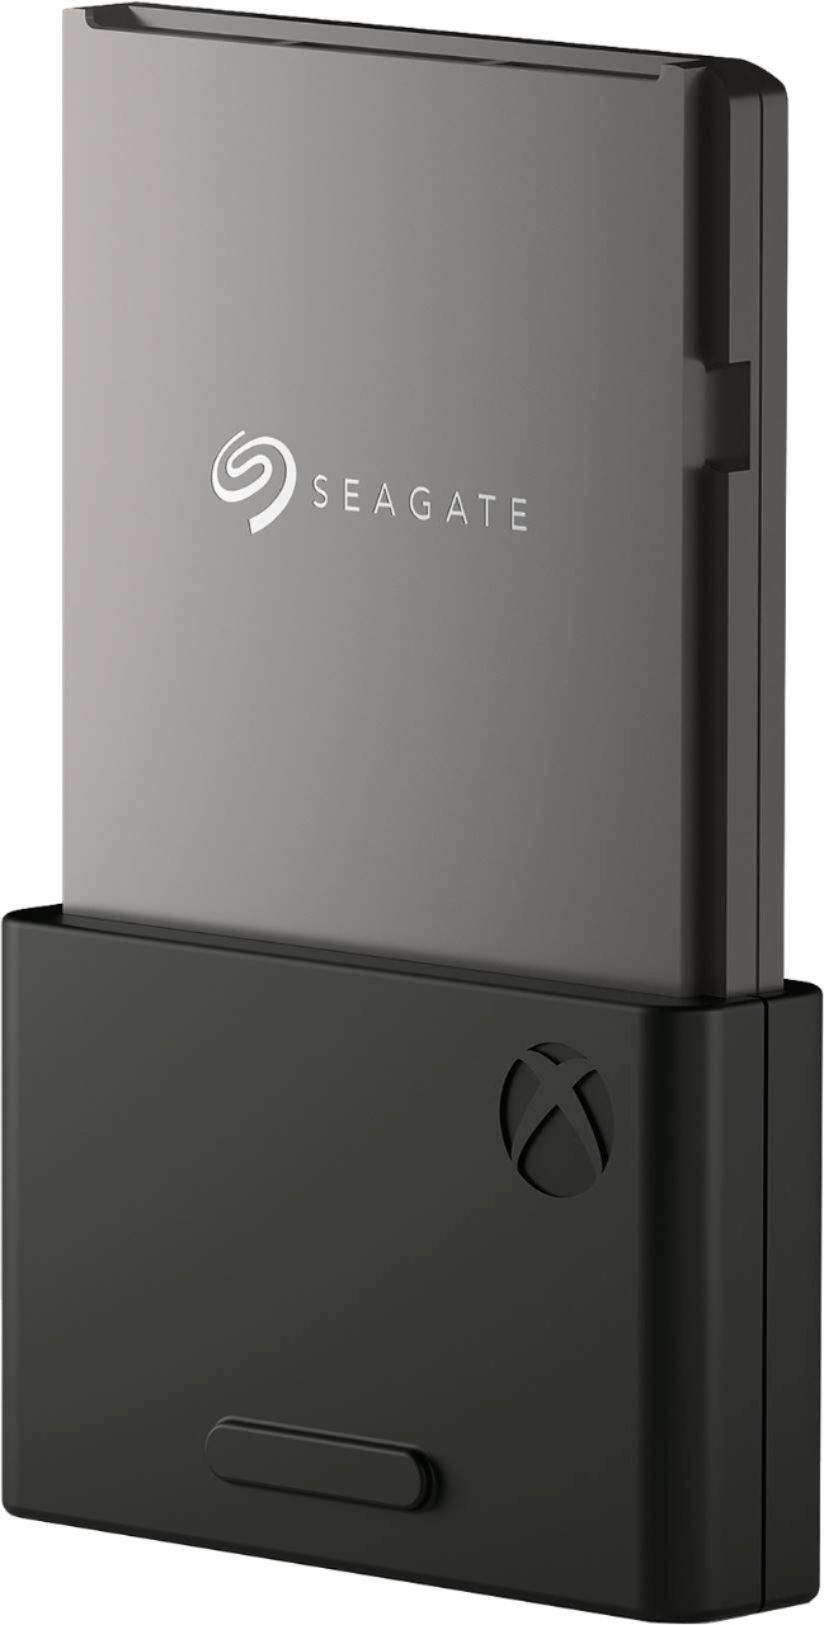 Seagate 1TB Storage Expansion Card for Xbox Series X|S Internal